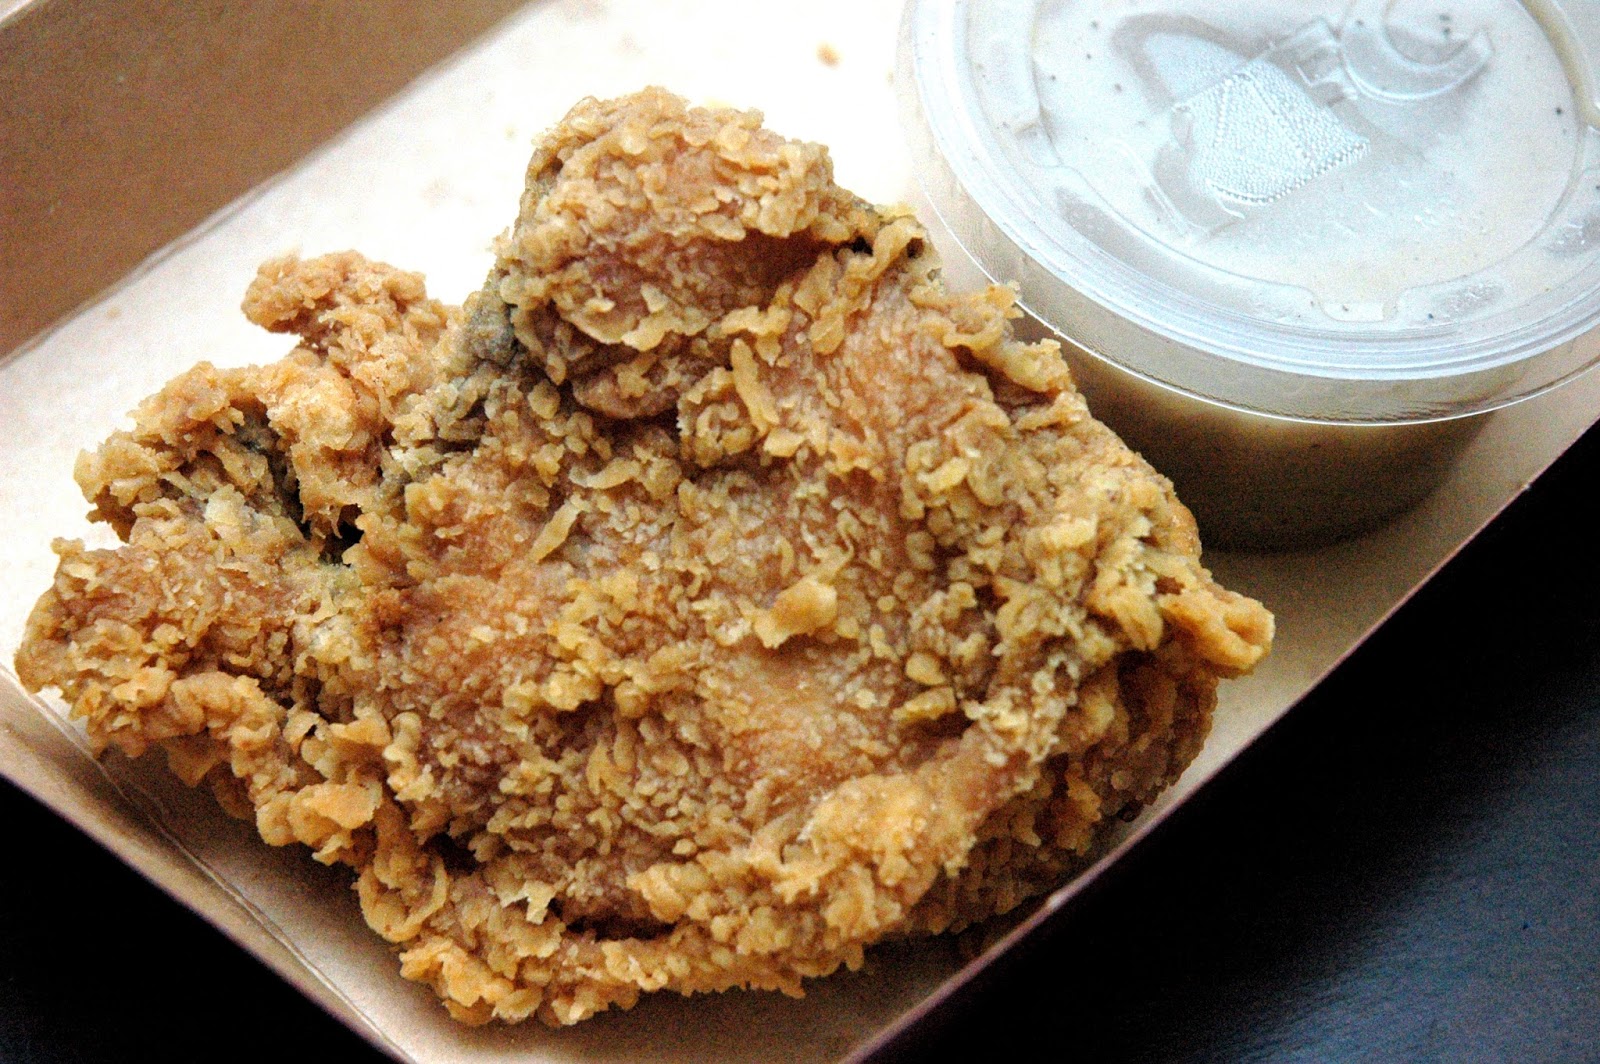 DUDE FOR FOOD: Make That Extra Crispy by The Colonel To Start The Year